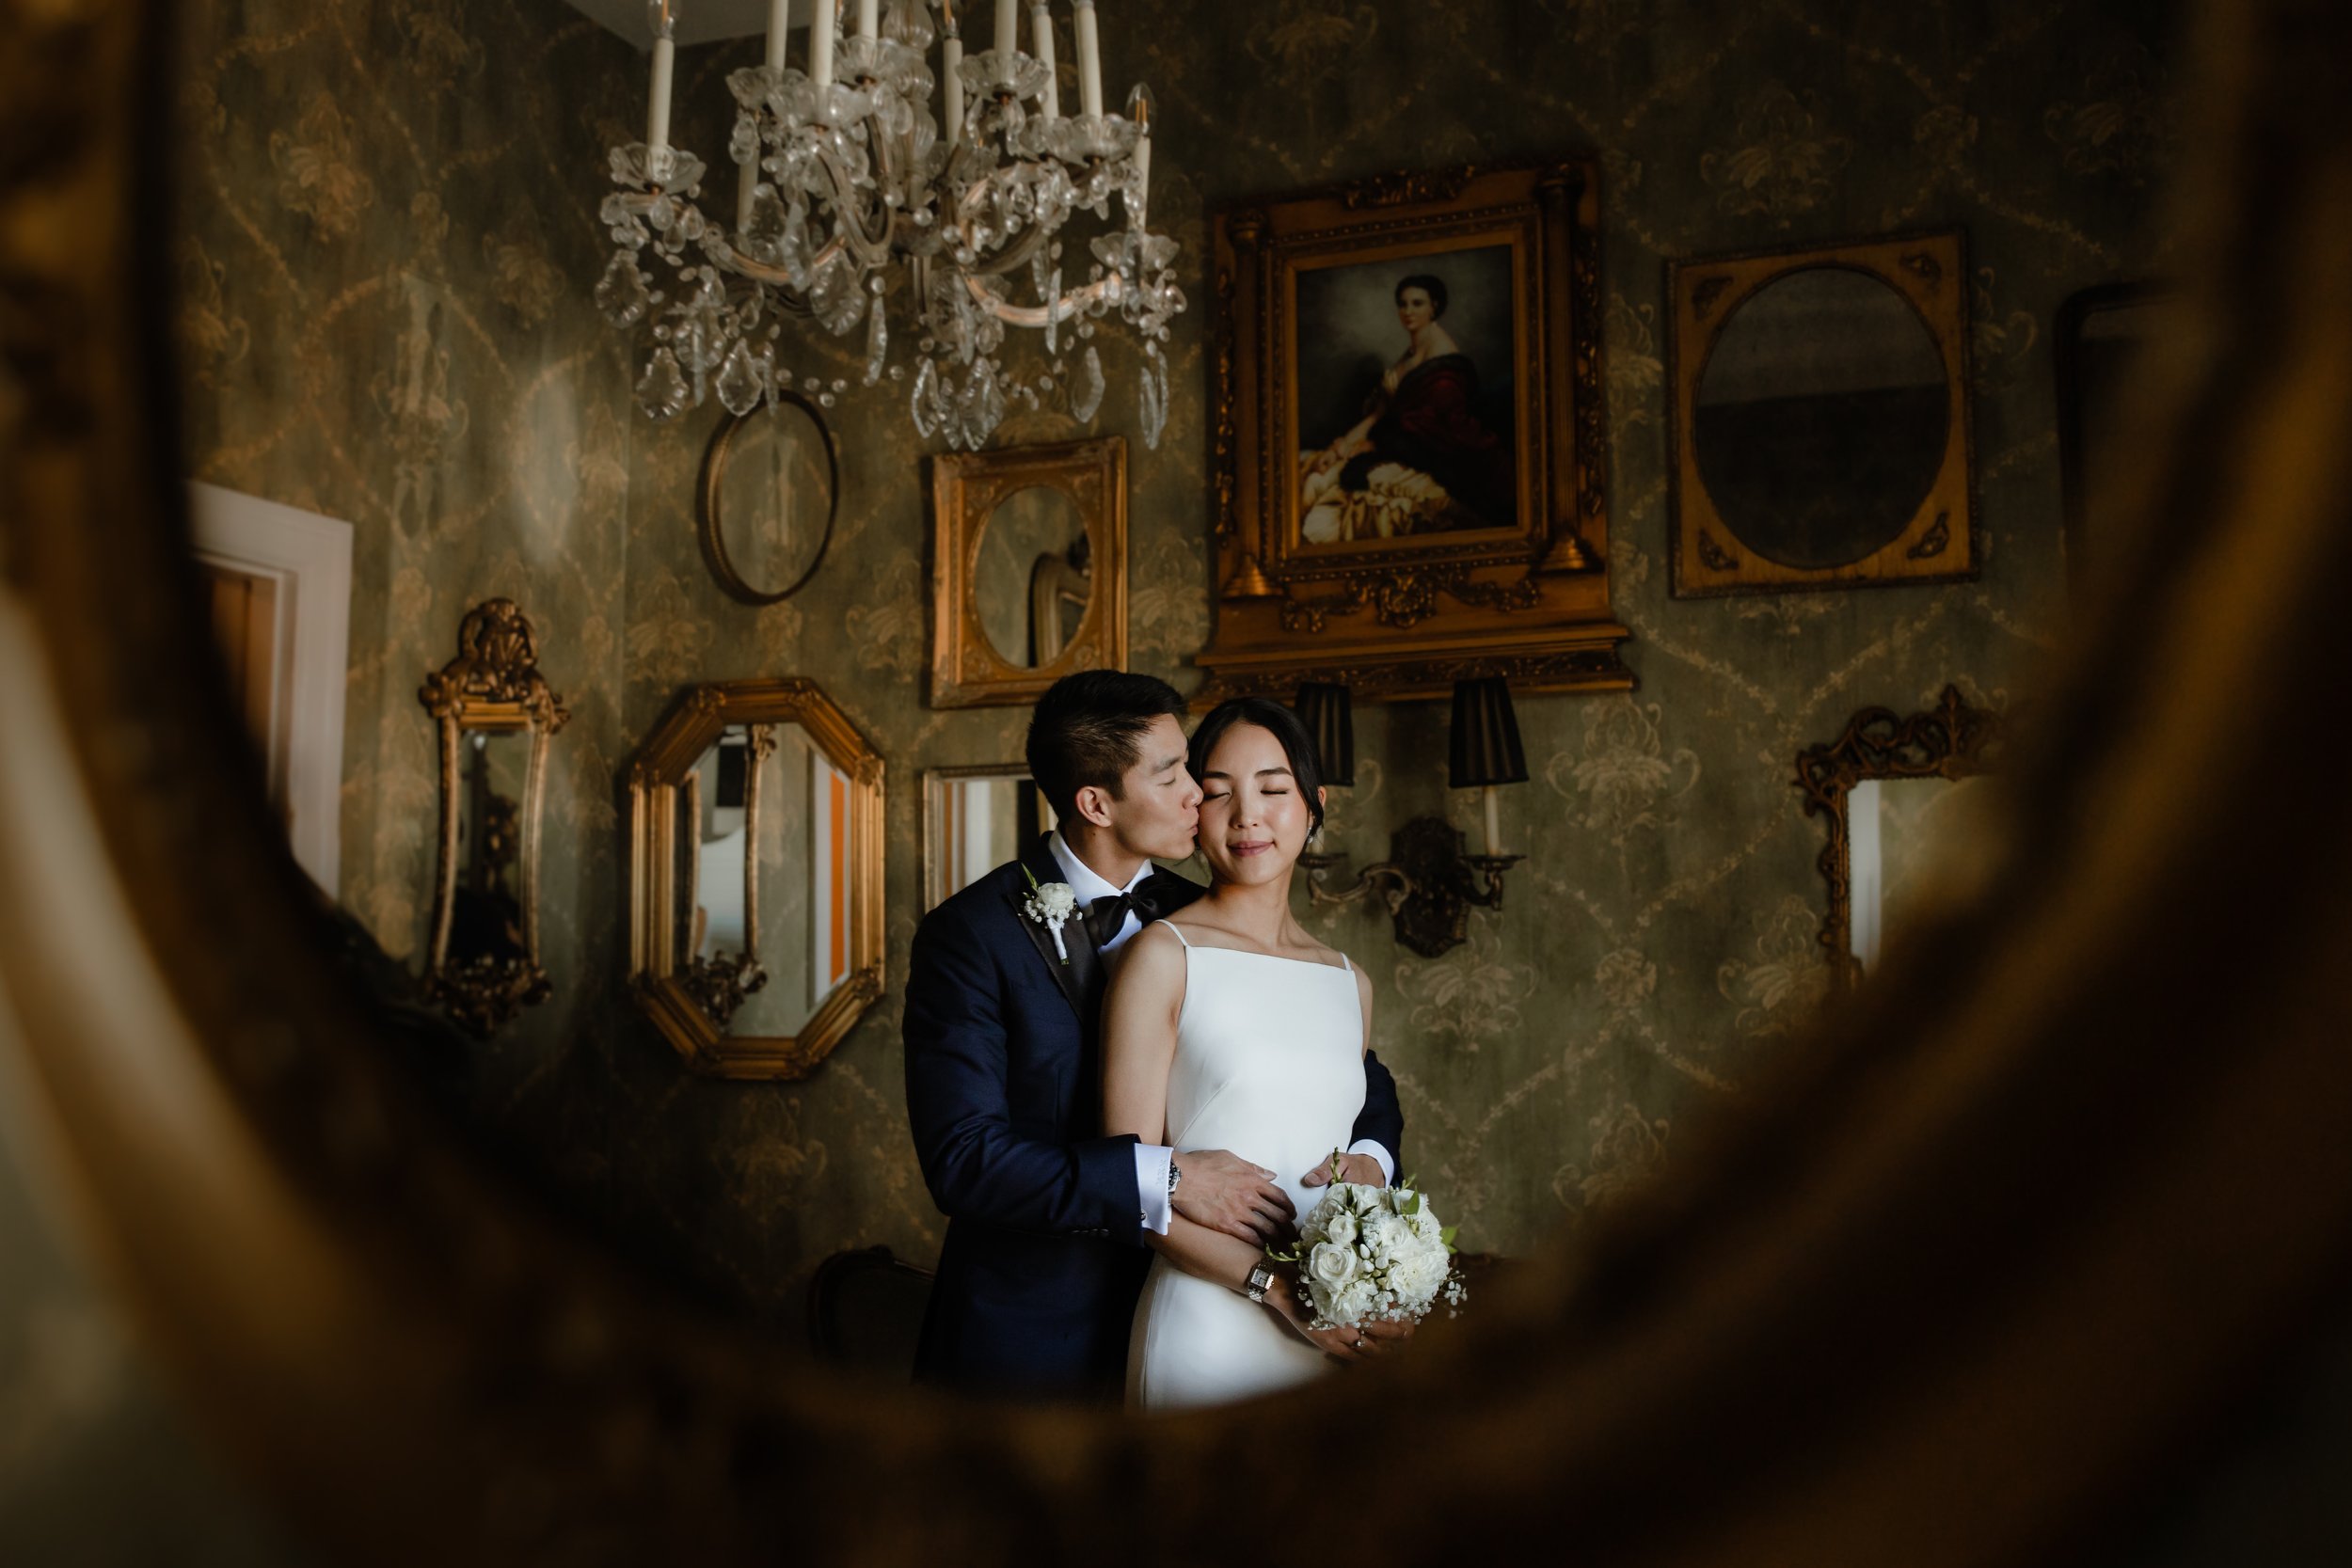  Jean and Mark's wedding at Ebell Long Beach - Eve Rox Photography 